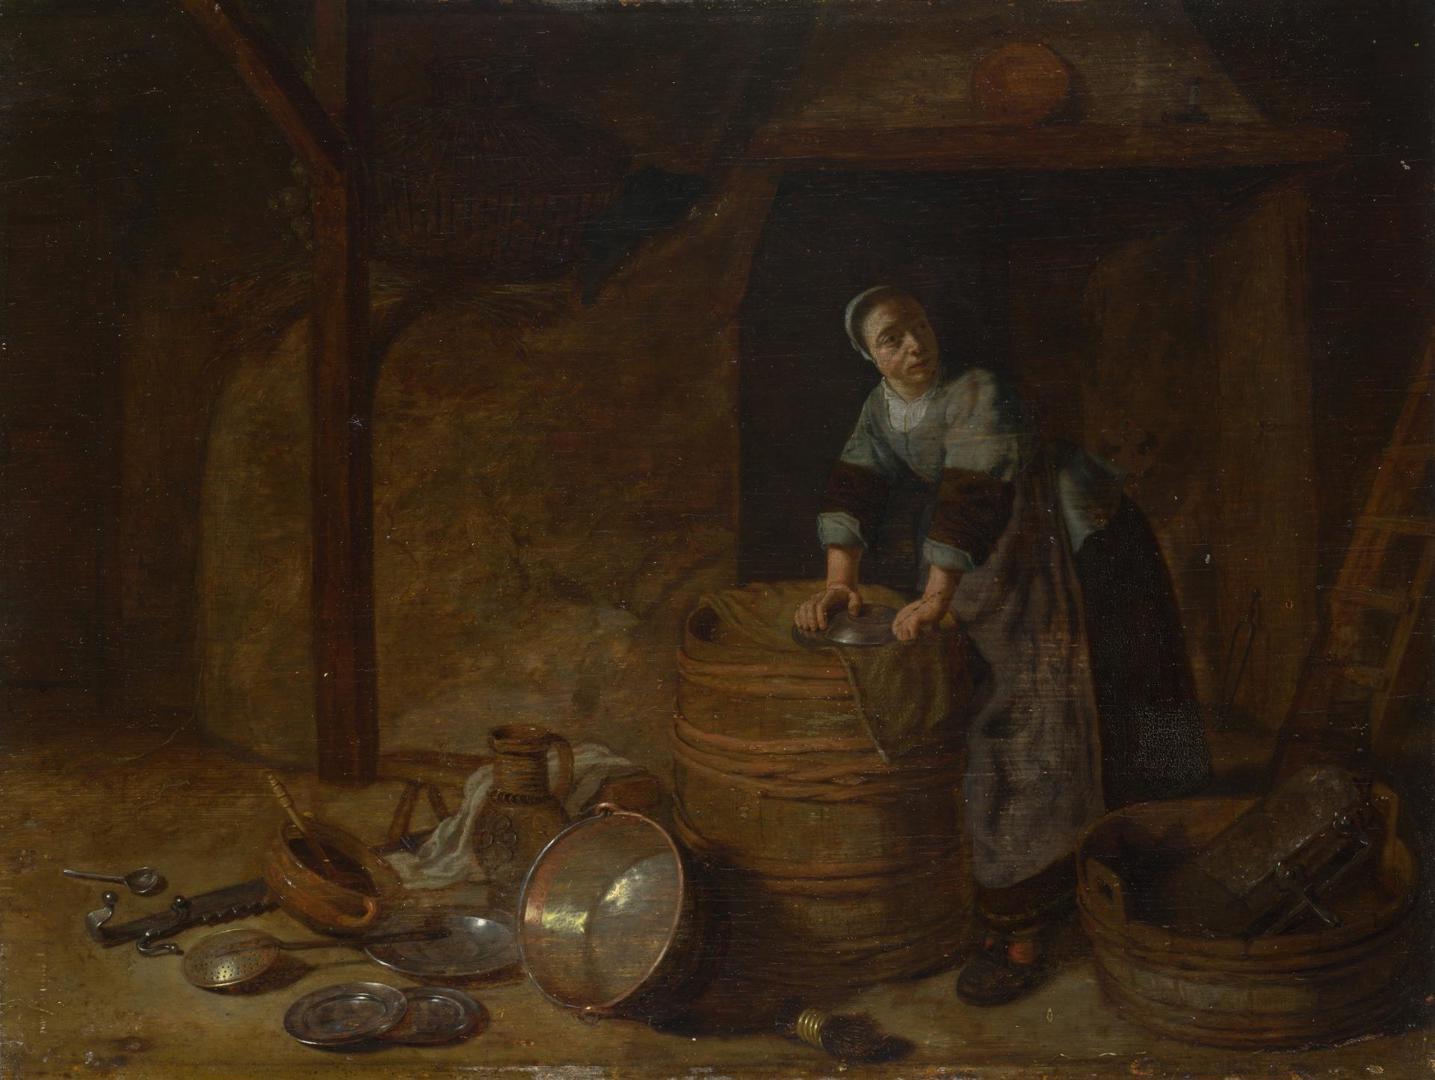 A Woman scouring a Pot by Possibly by Pieter van den Bosch